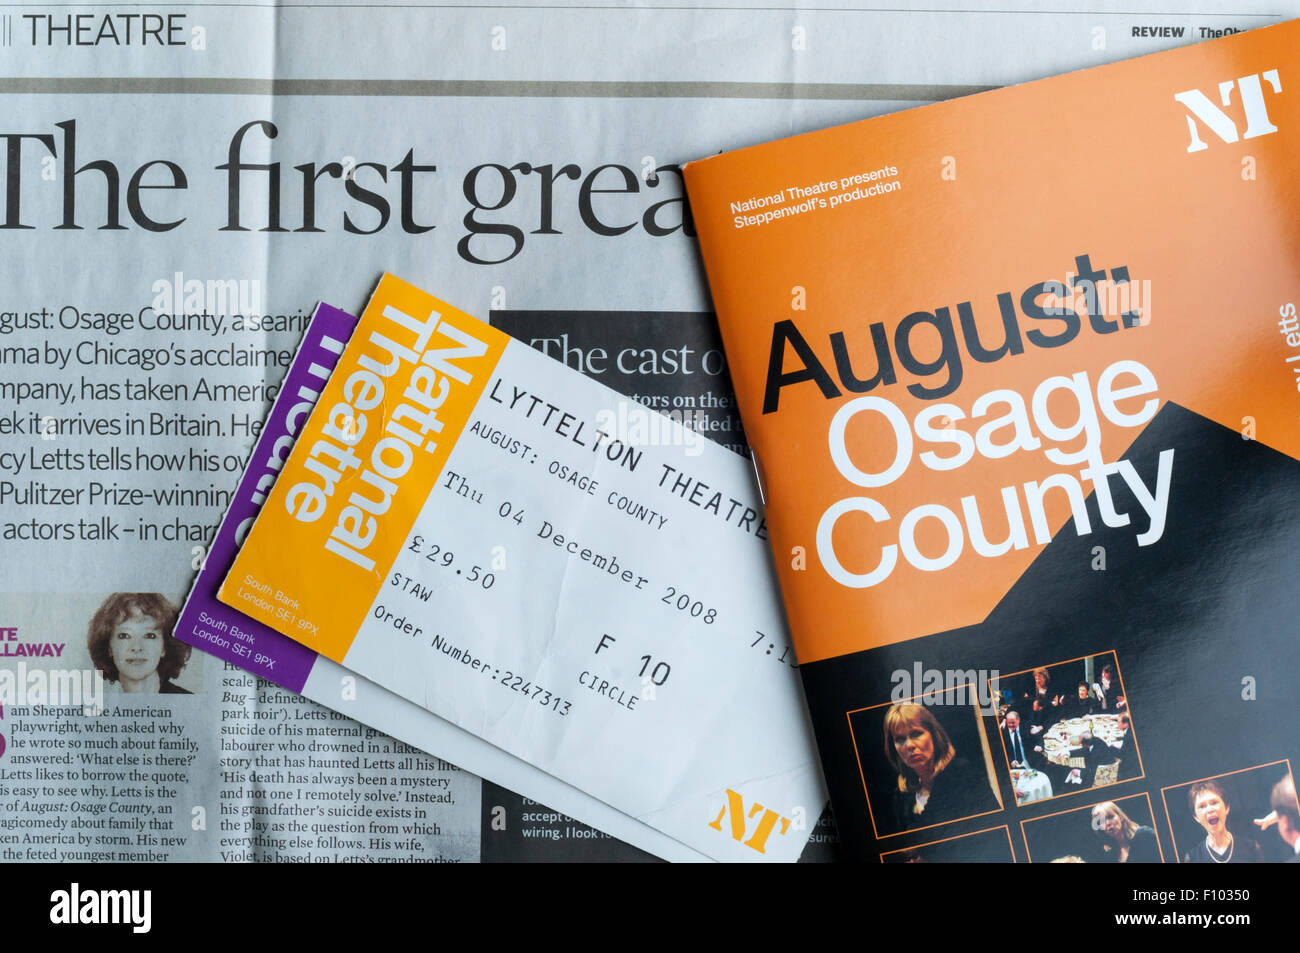 Theatre program, tickets and newspaper review. Stock Photo